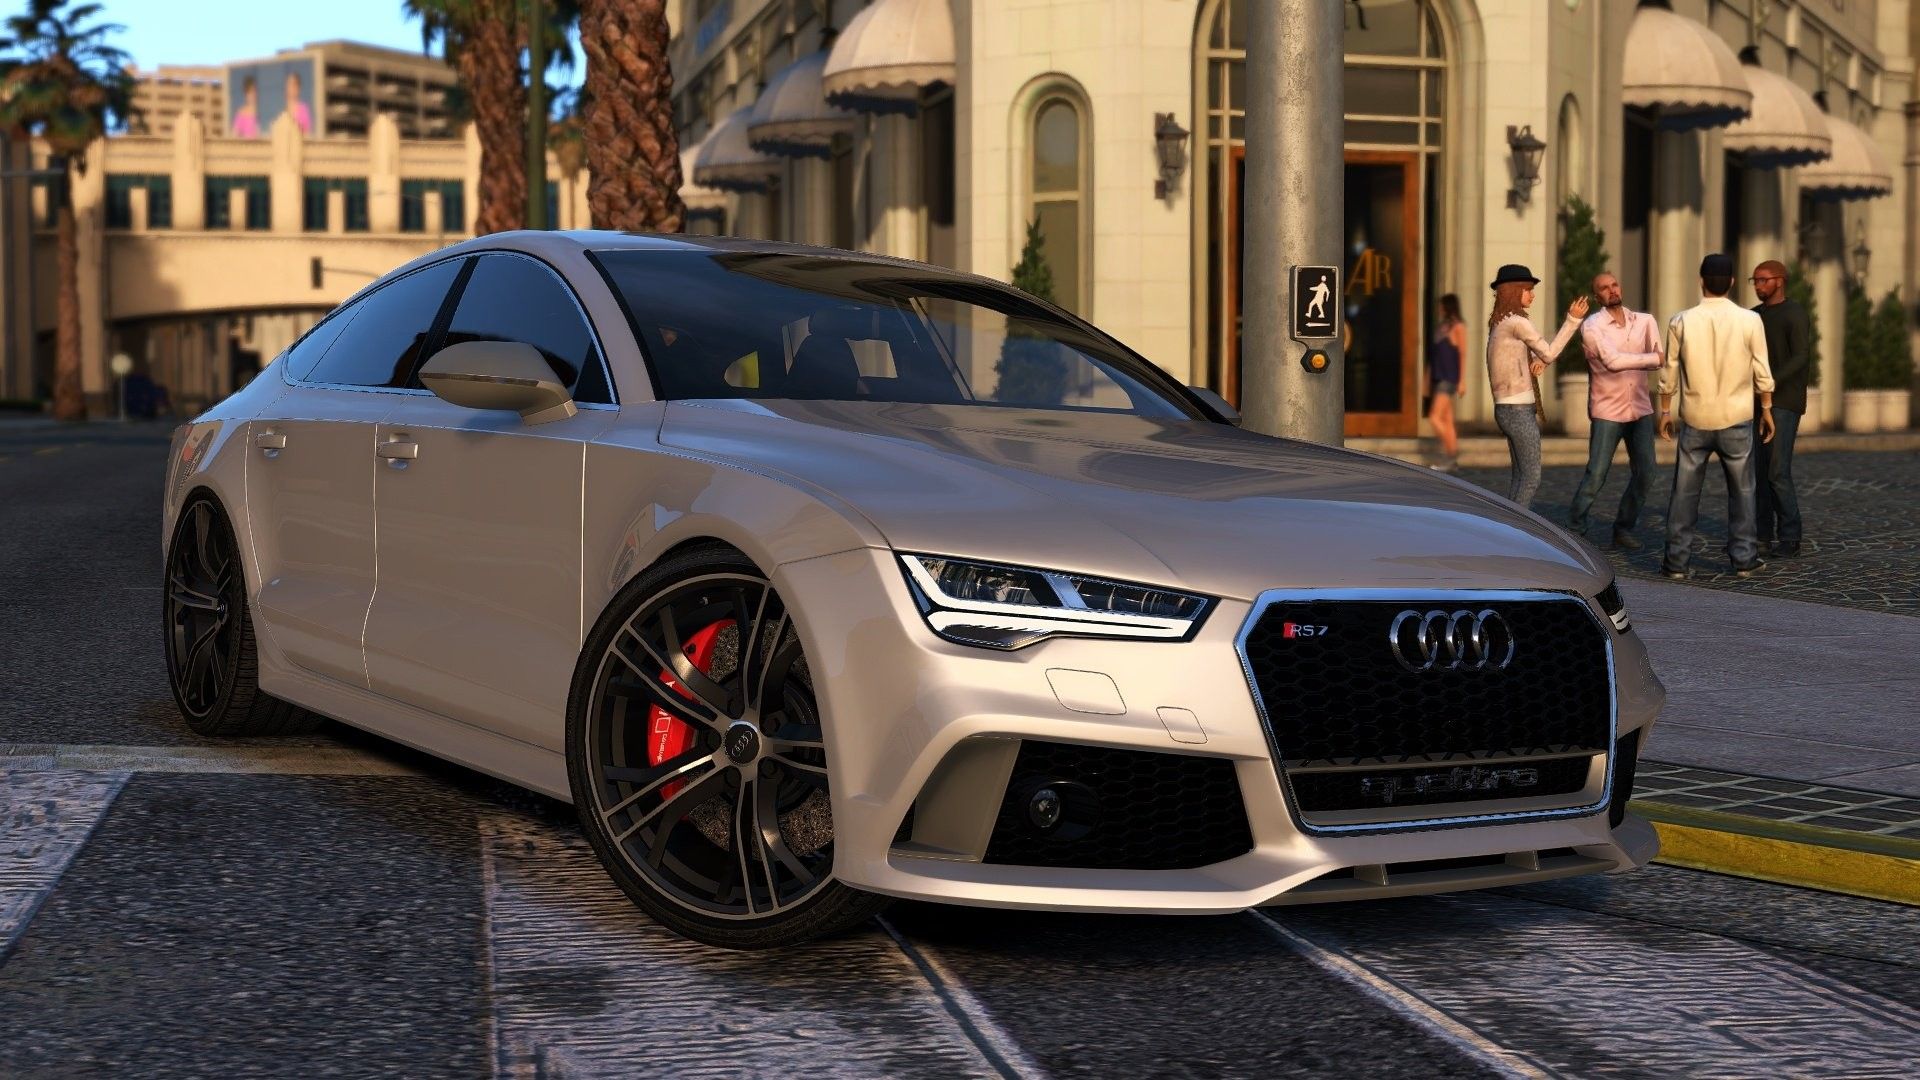 Rs7 Wallpapers